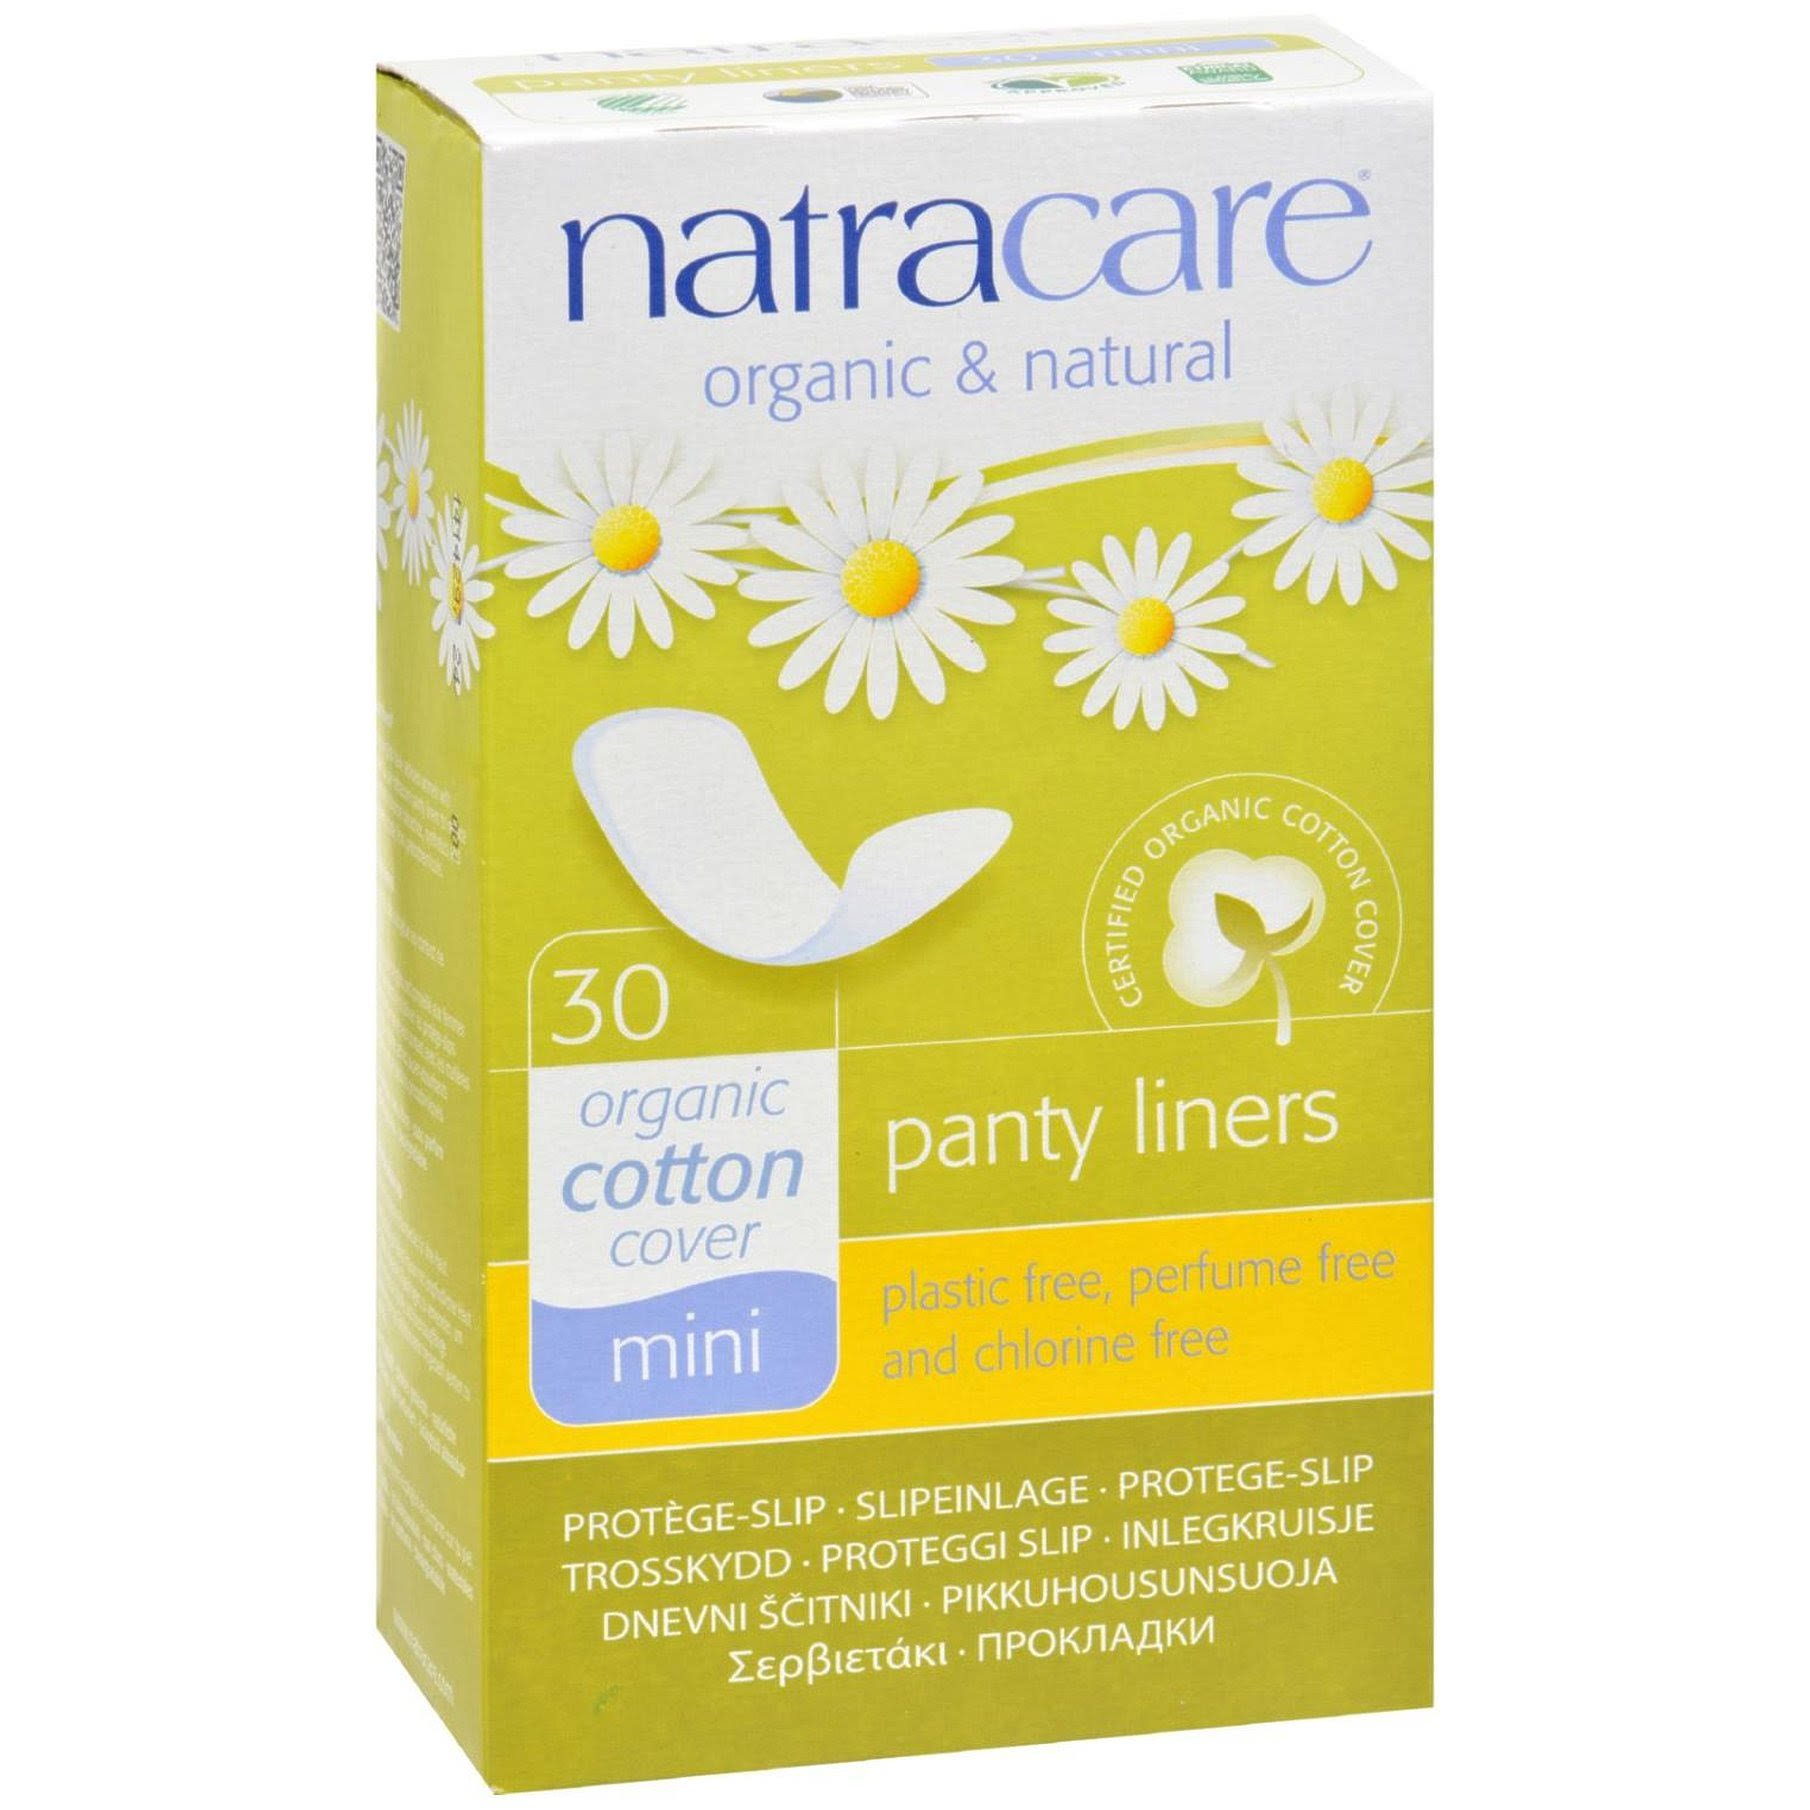 Natracare Mini Panty Liners - 30 Pack